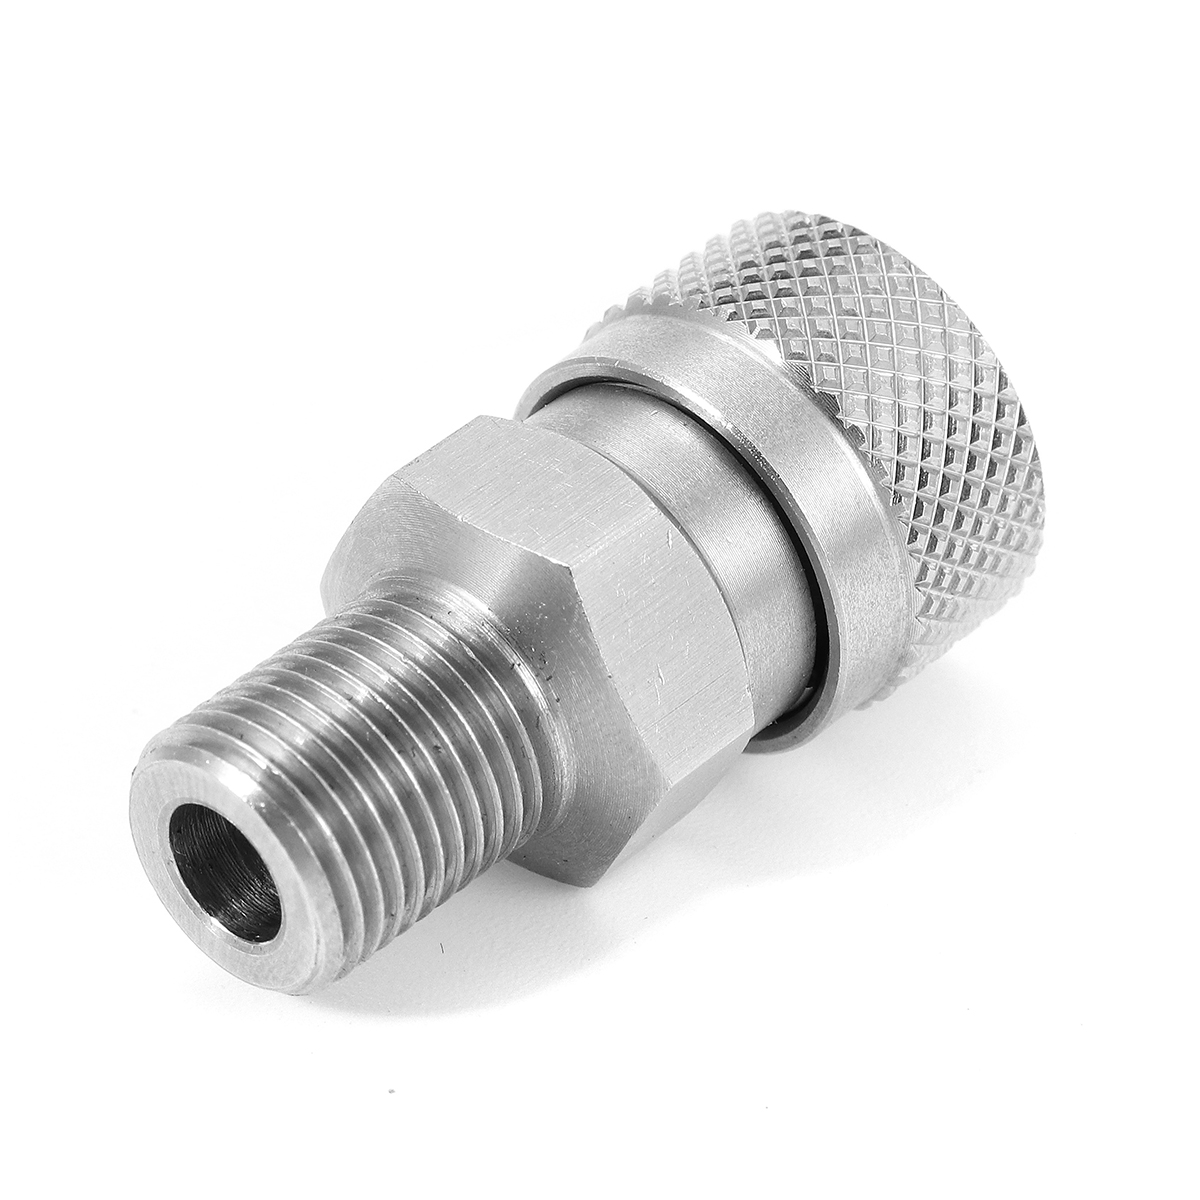 18-inch-BSP-Stainless-Steel-Male-Plug-Quick-Head-Connector-PCP-Release-Disconnect-Coupler-Socket-1309148